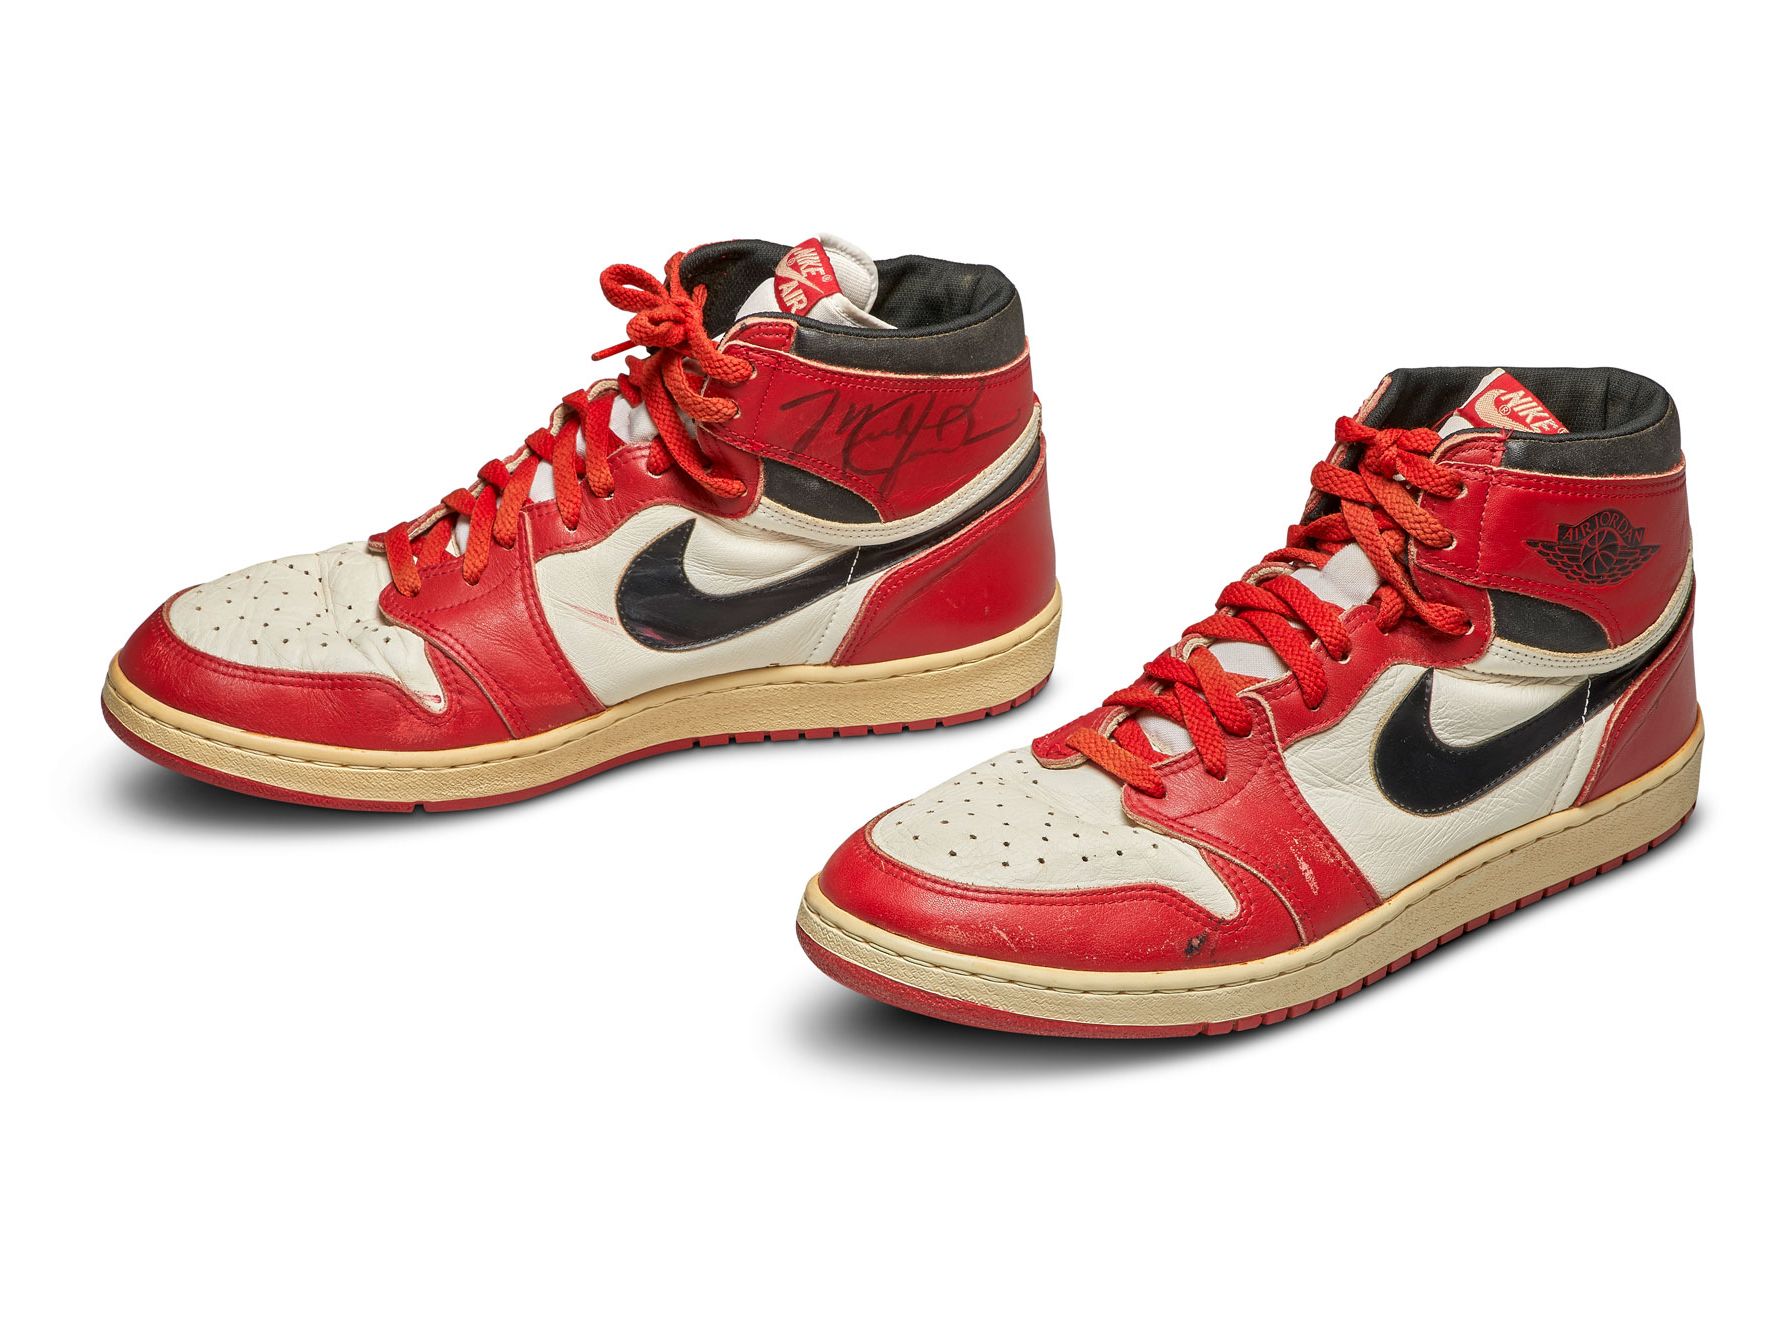 Michael Jordan's signature Air Jordan from sell for record-breaking price, Sotheby's says | CNN